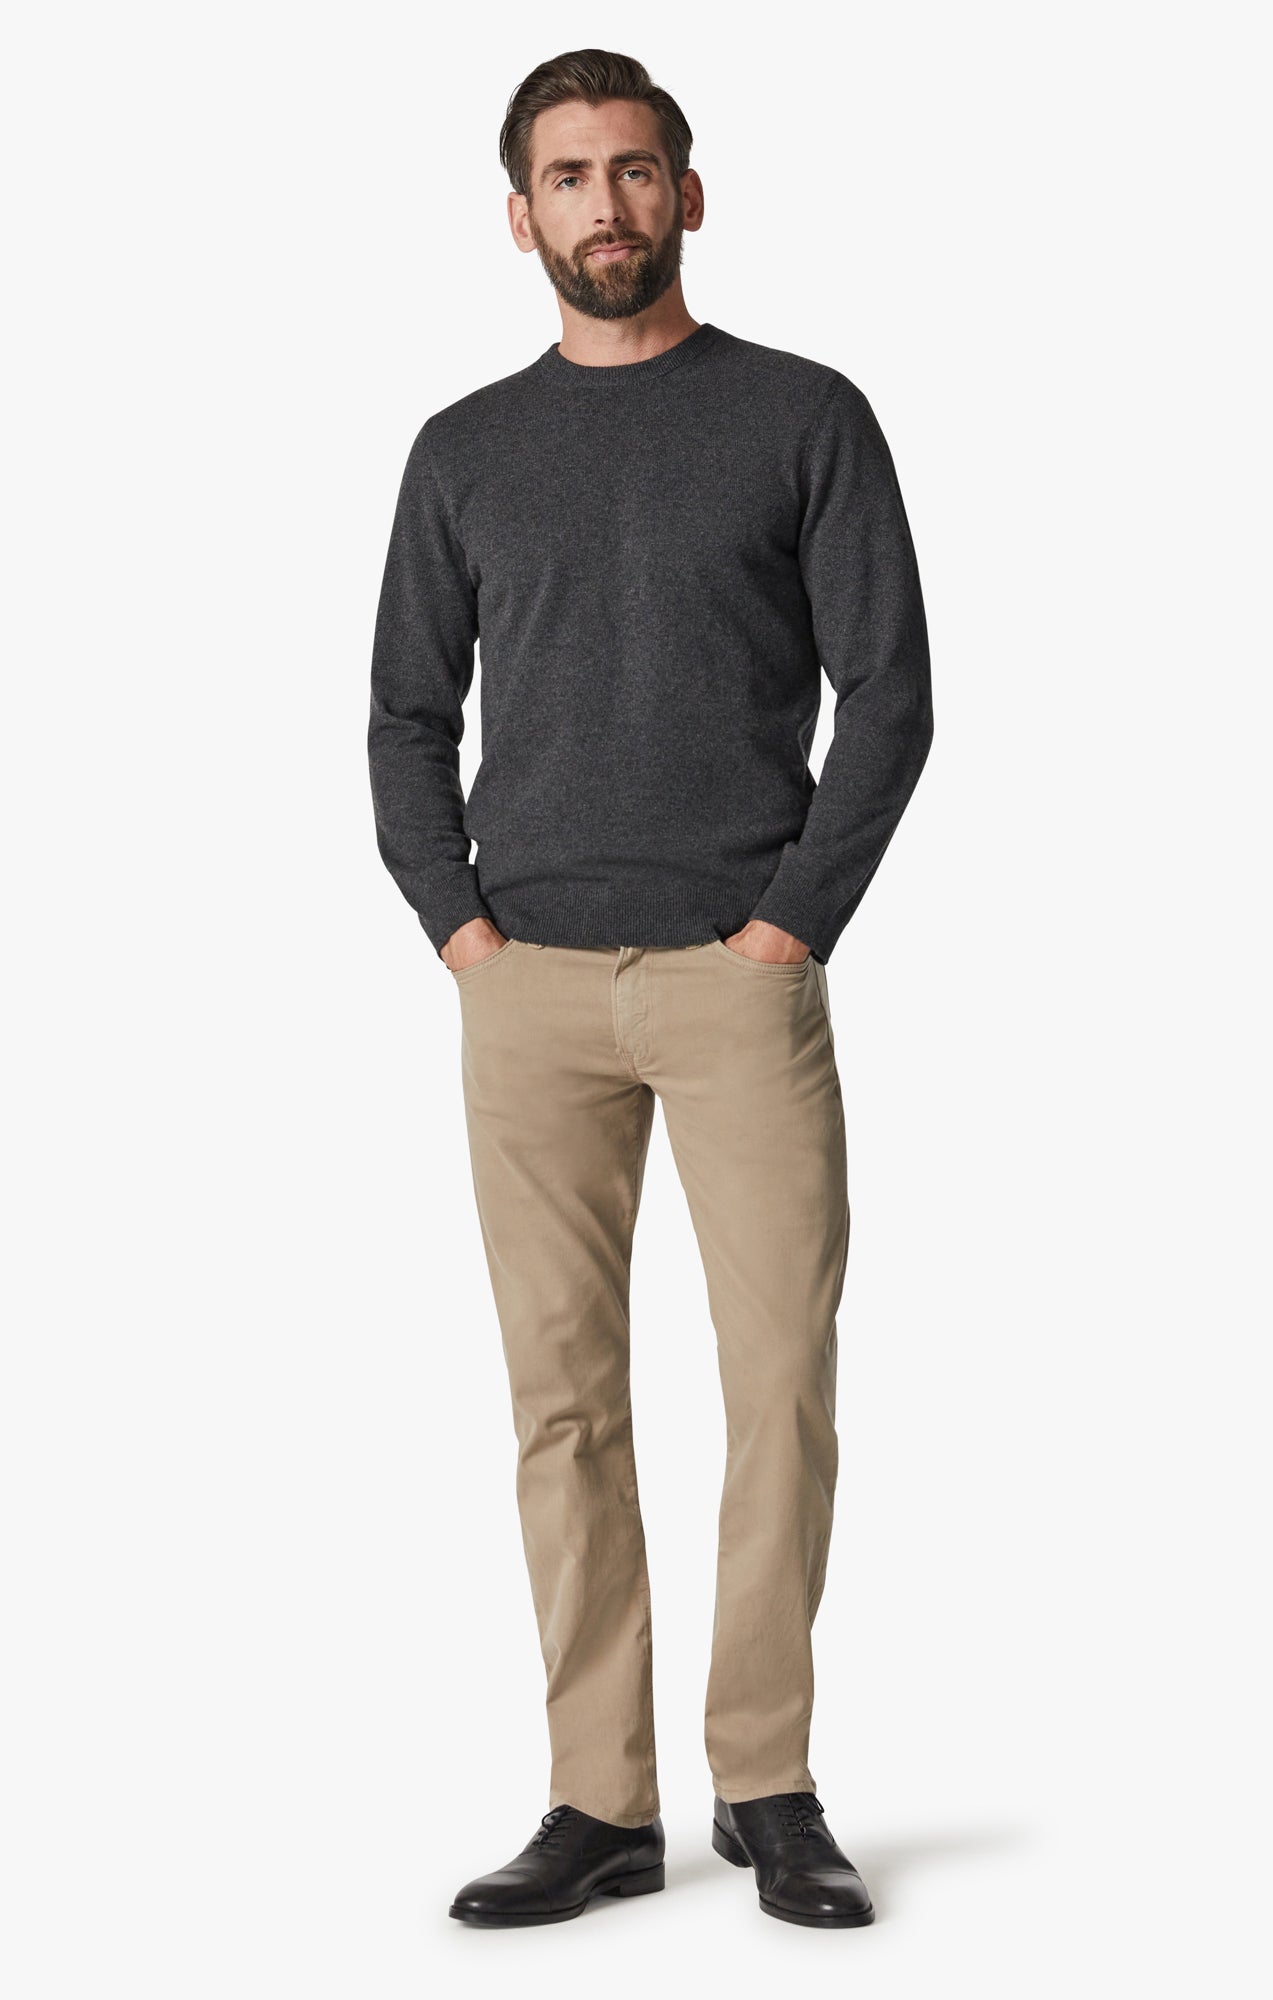 Cool Tapered Leg Pants In Cashew Brushed Twill Image 1